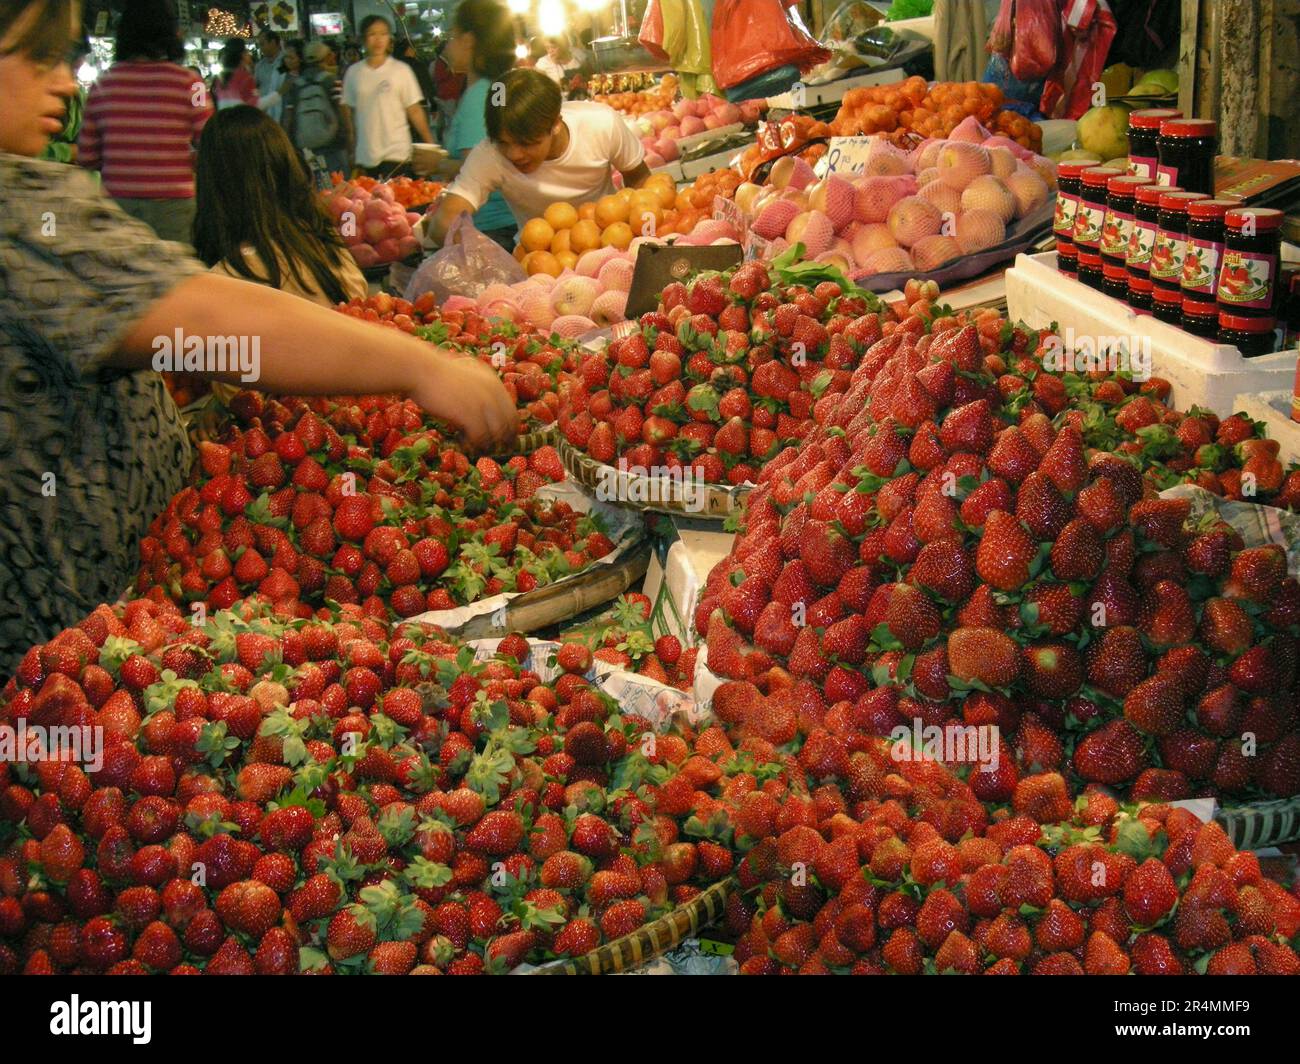 Strawberries in central market, Baguio, Philippines Stock Photo